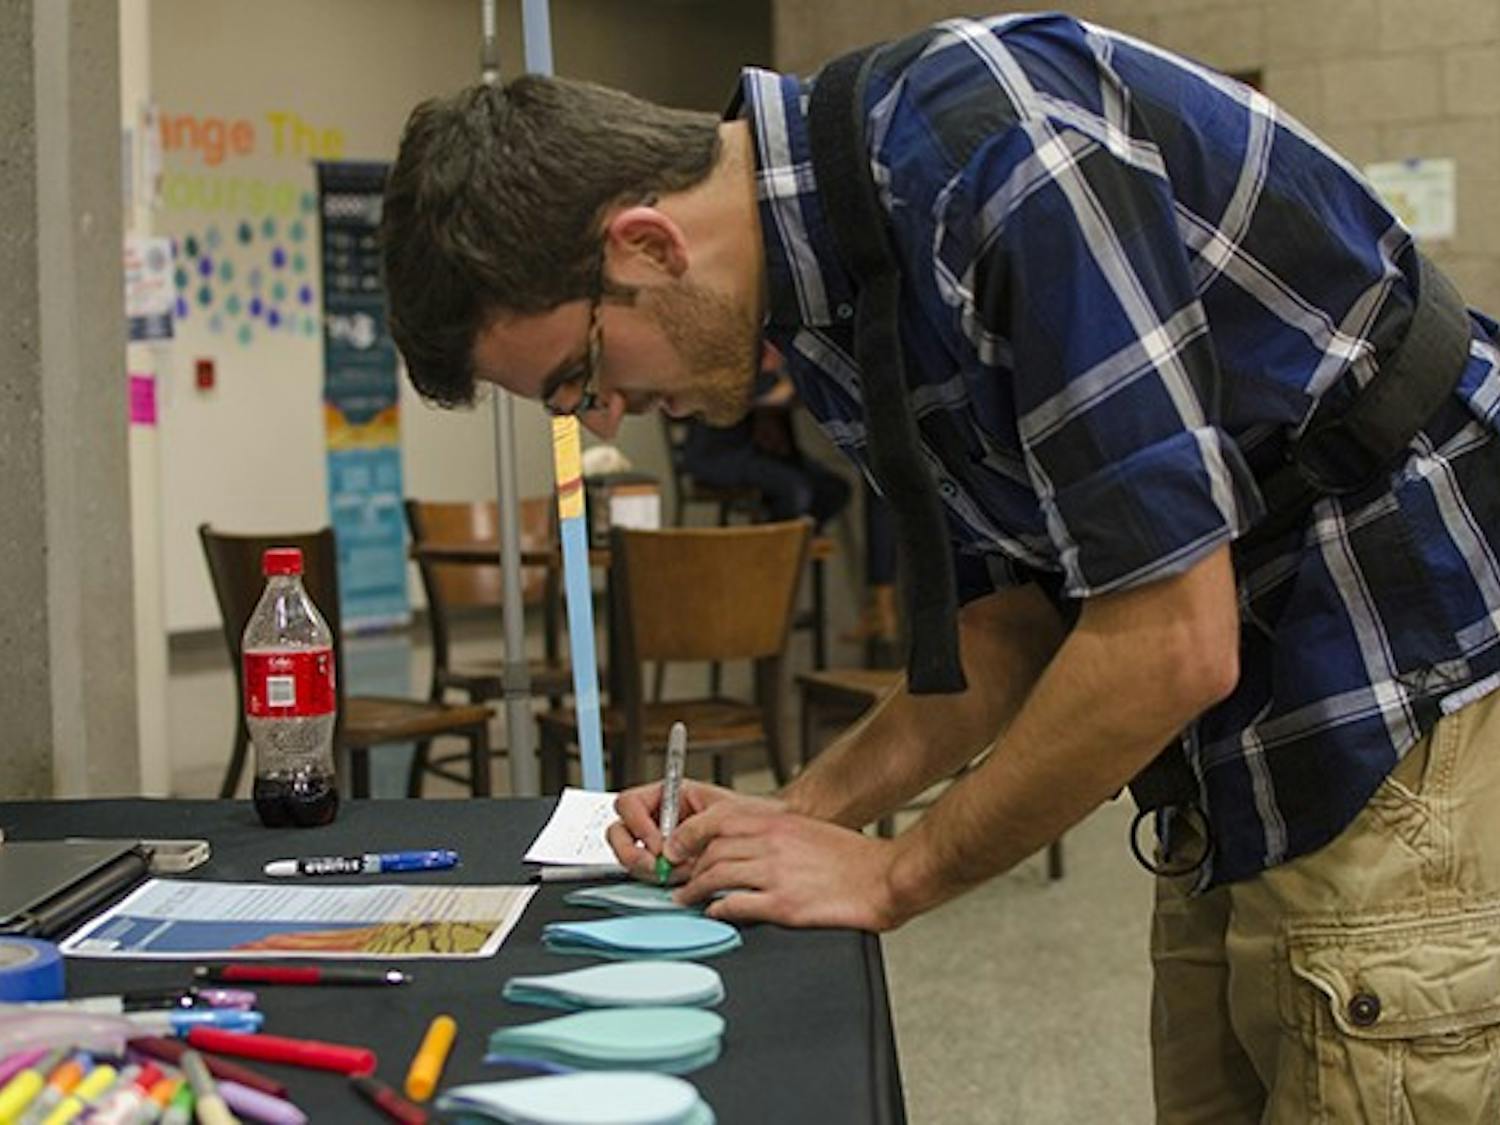 Wednesday, Nov. 12 - Nathan Francois (cq), a freshman studying biomedical engineering at Arizona State University, signs a pledge to conserve water as part of a larger campaign to restore 140 million gallons of water to the Colorado River. Photo by Ethan Fichtner.